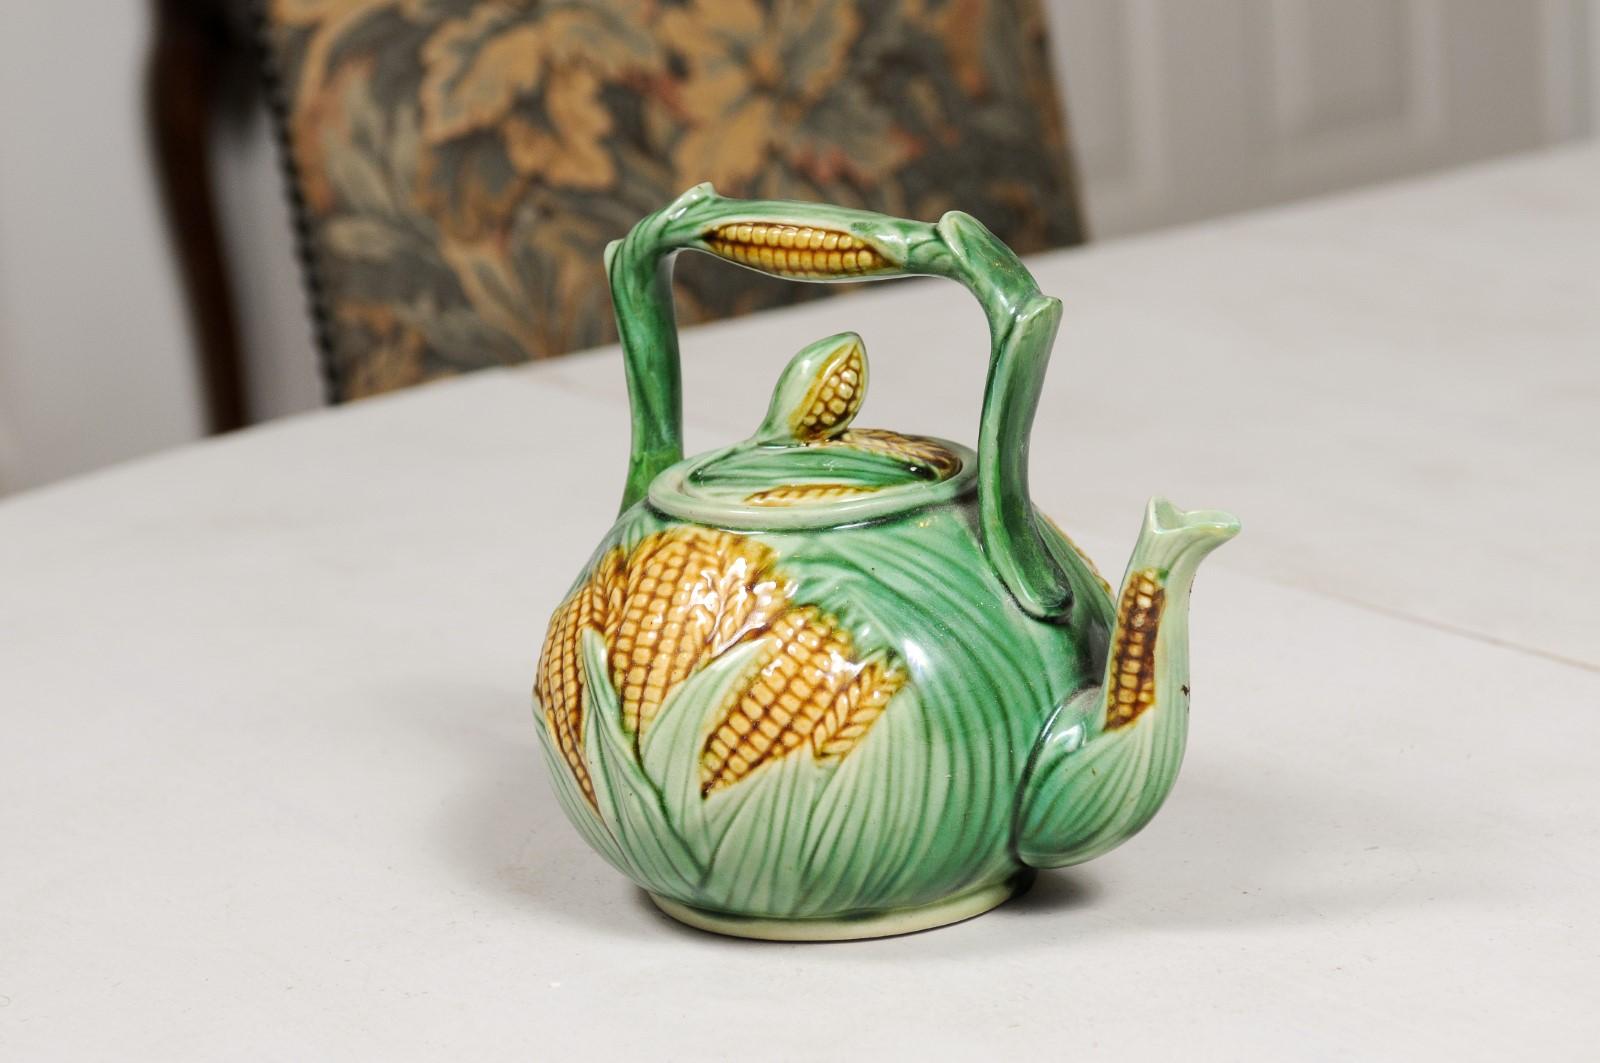 A French majolica lidded teapot from the 19th century, with green ground and corn motifs. Created in France during the 19th century, this majolica teapot features a circular body adorned with lucious green leaves from which corn stalks are emerging.